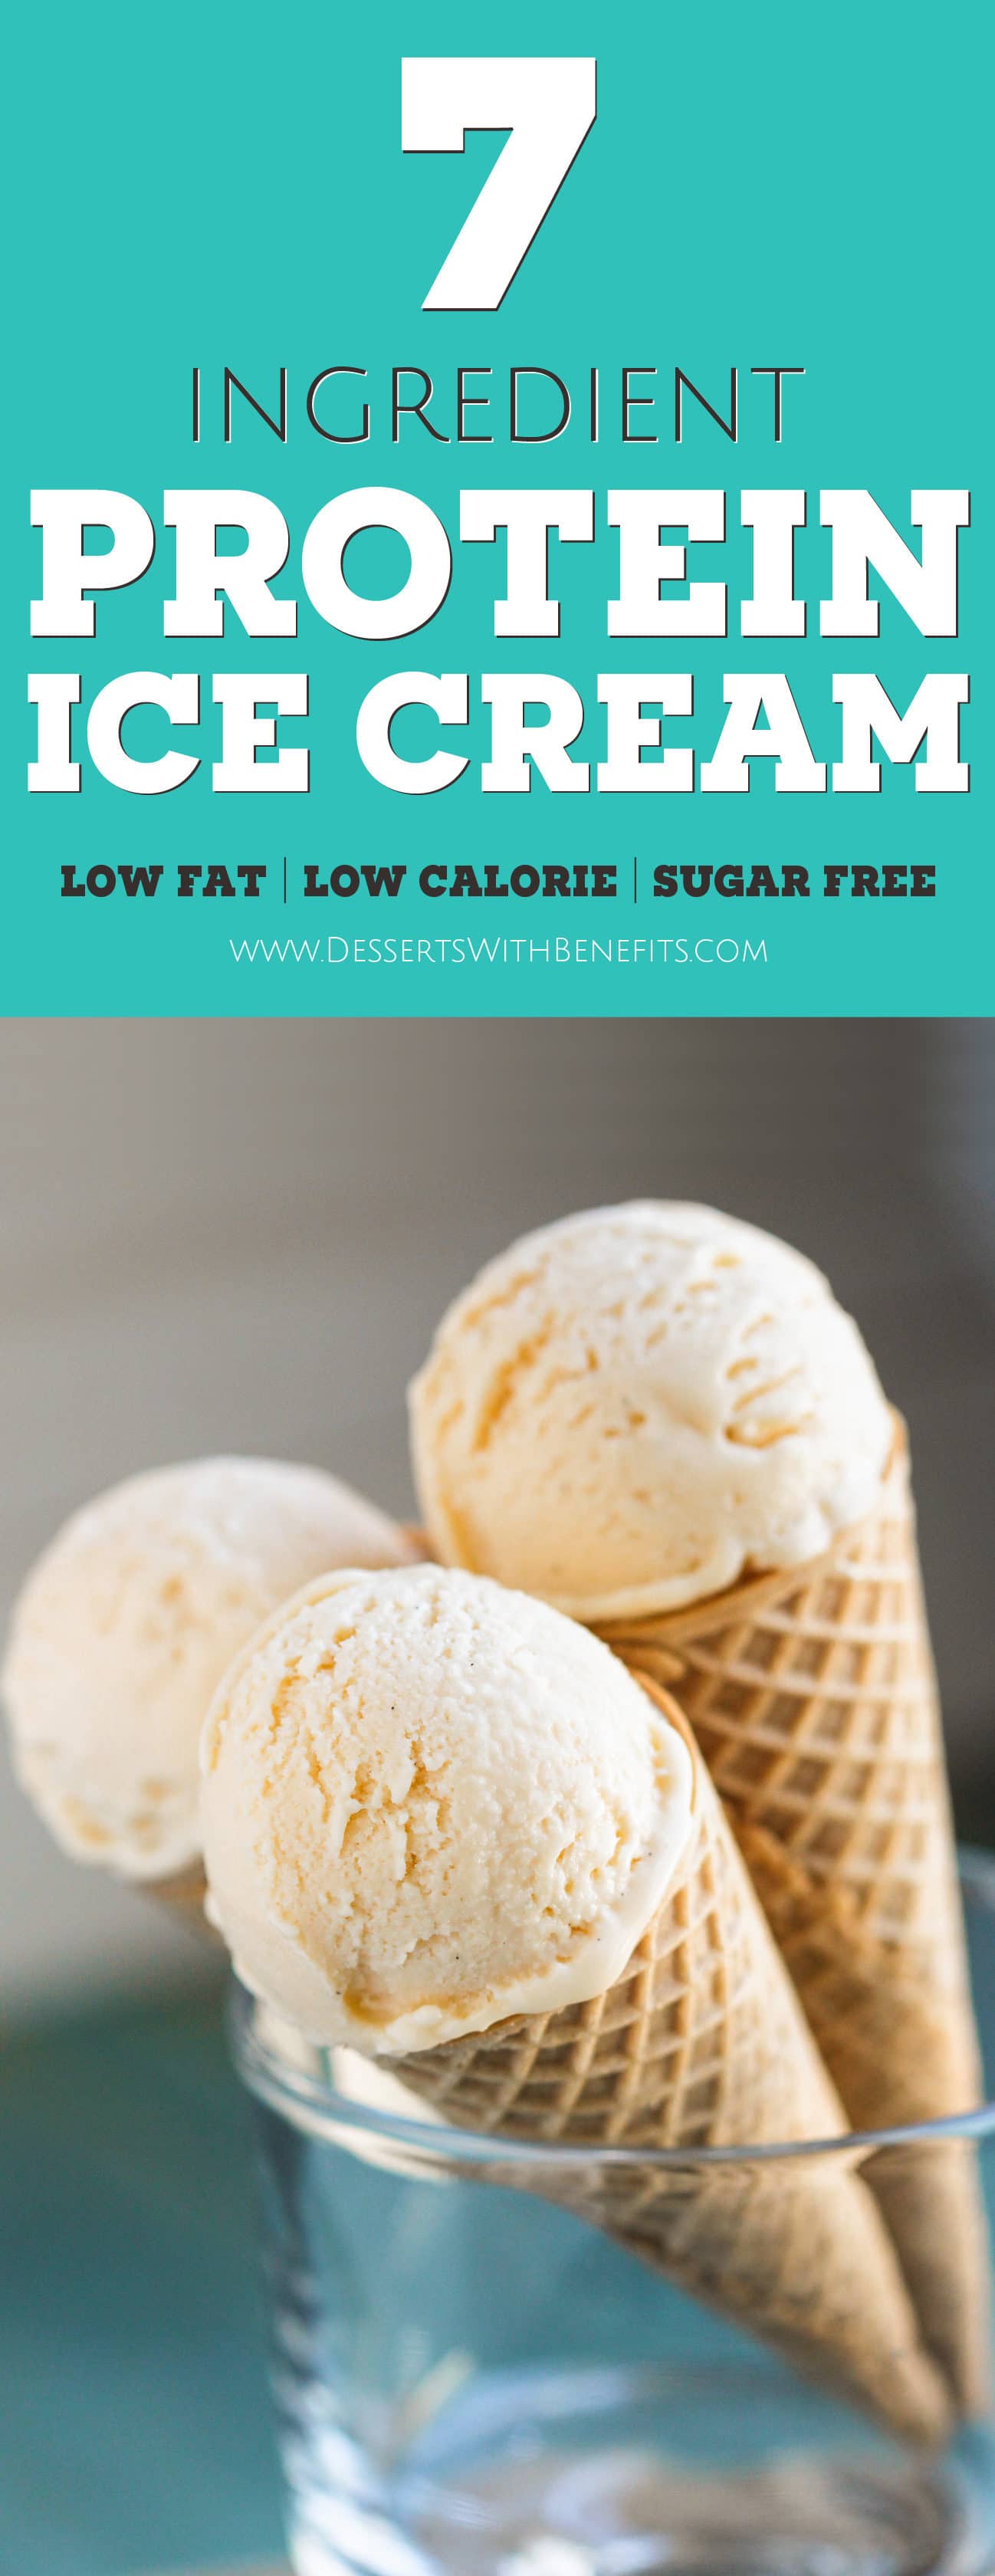 This Healthy Vanilla Protein Ice Cream is so sweet, so rich, and so creamy, you'd never know it's completely guilt-free! Yes, this sugar free ice cream is low carb, low fat, high protein, and gluten free -- Healthy Dessert Recipes with sugar free, low calorie, low fat, high protein, gluten free, dairy free and vegan options at the Desserts With Benefits Blog (www.DessertsWithBenefits.com)